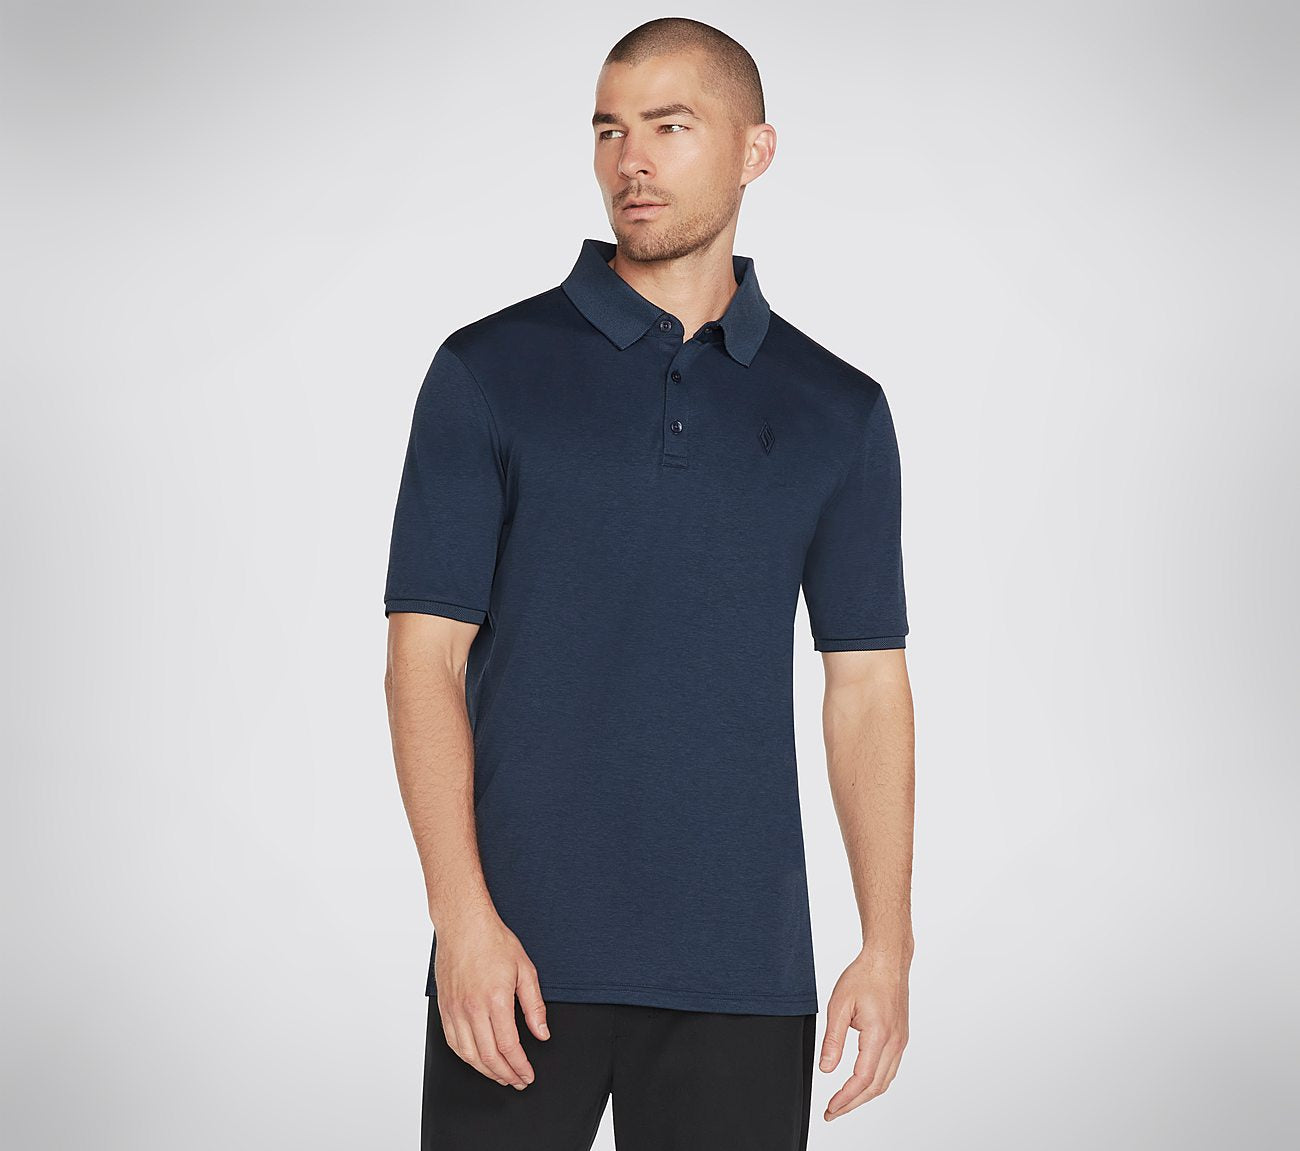 Skechers Apparel Off Duty Polo Clothes Skechers